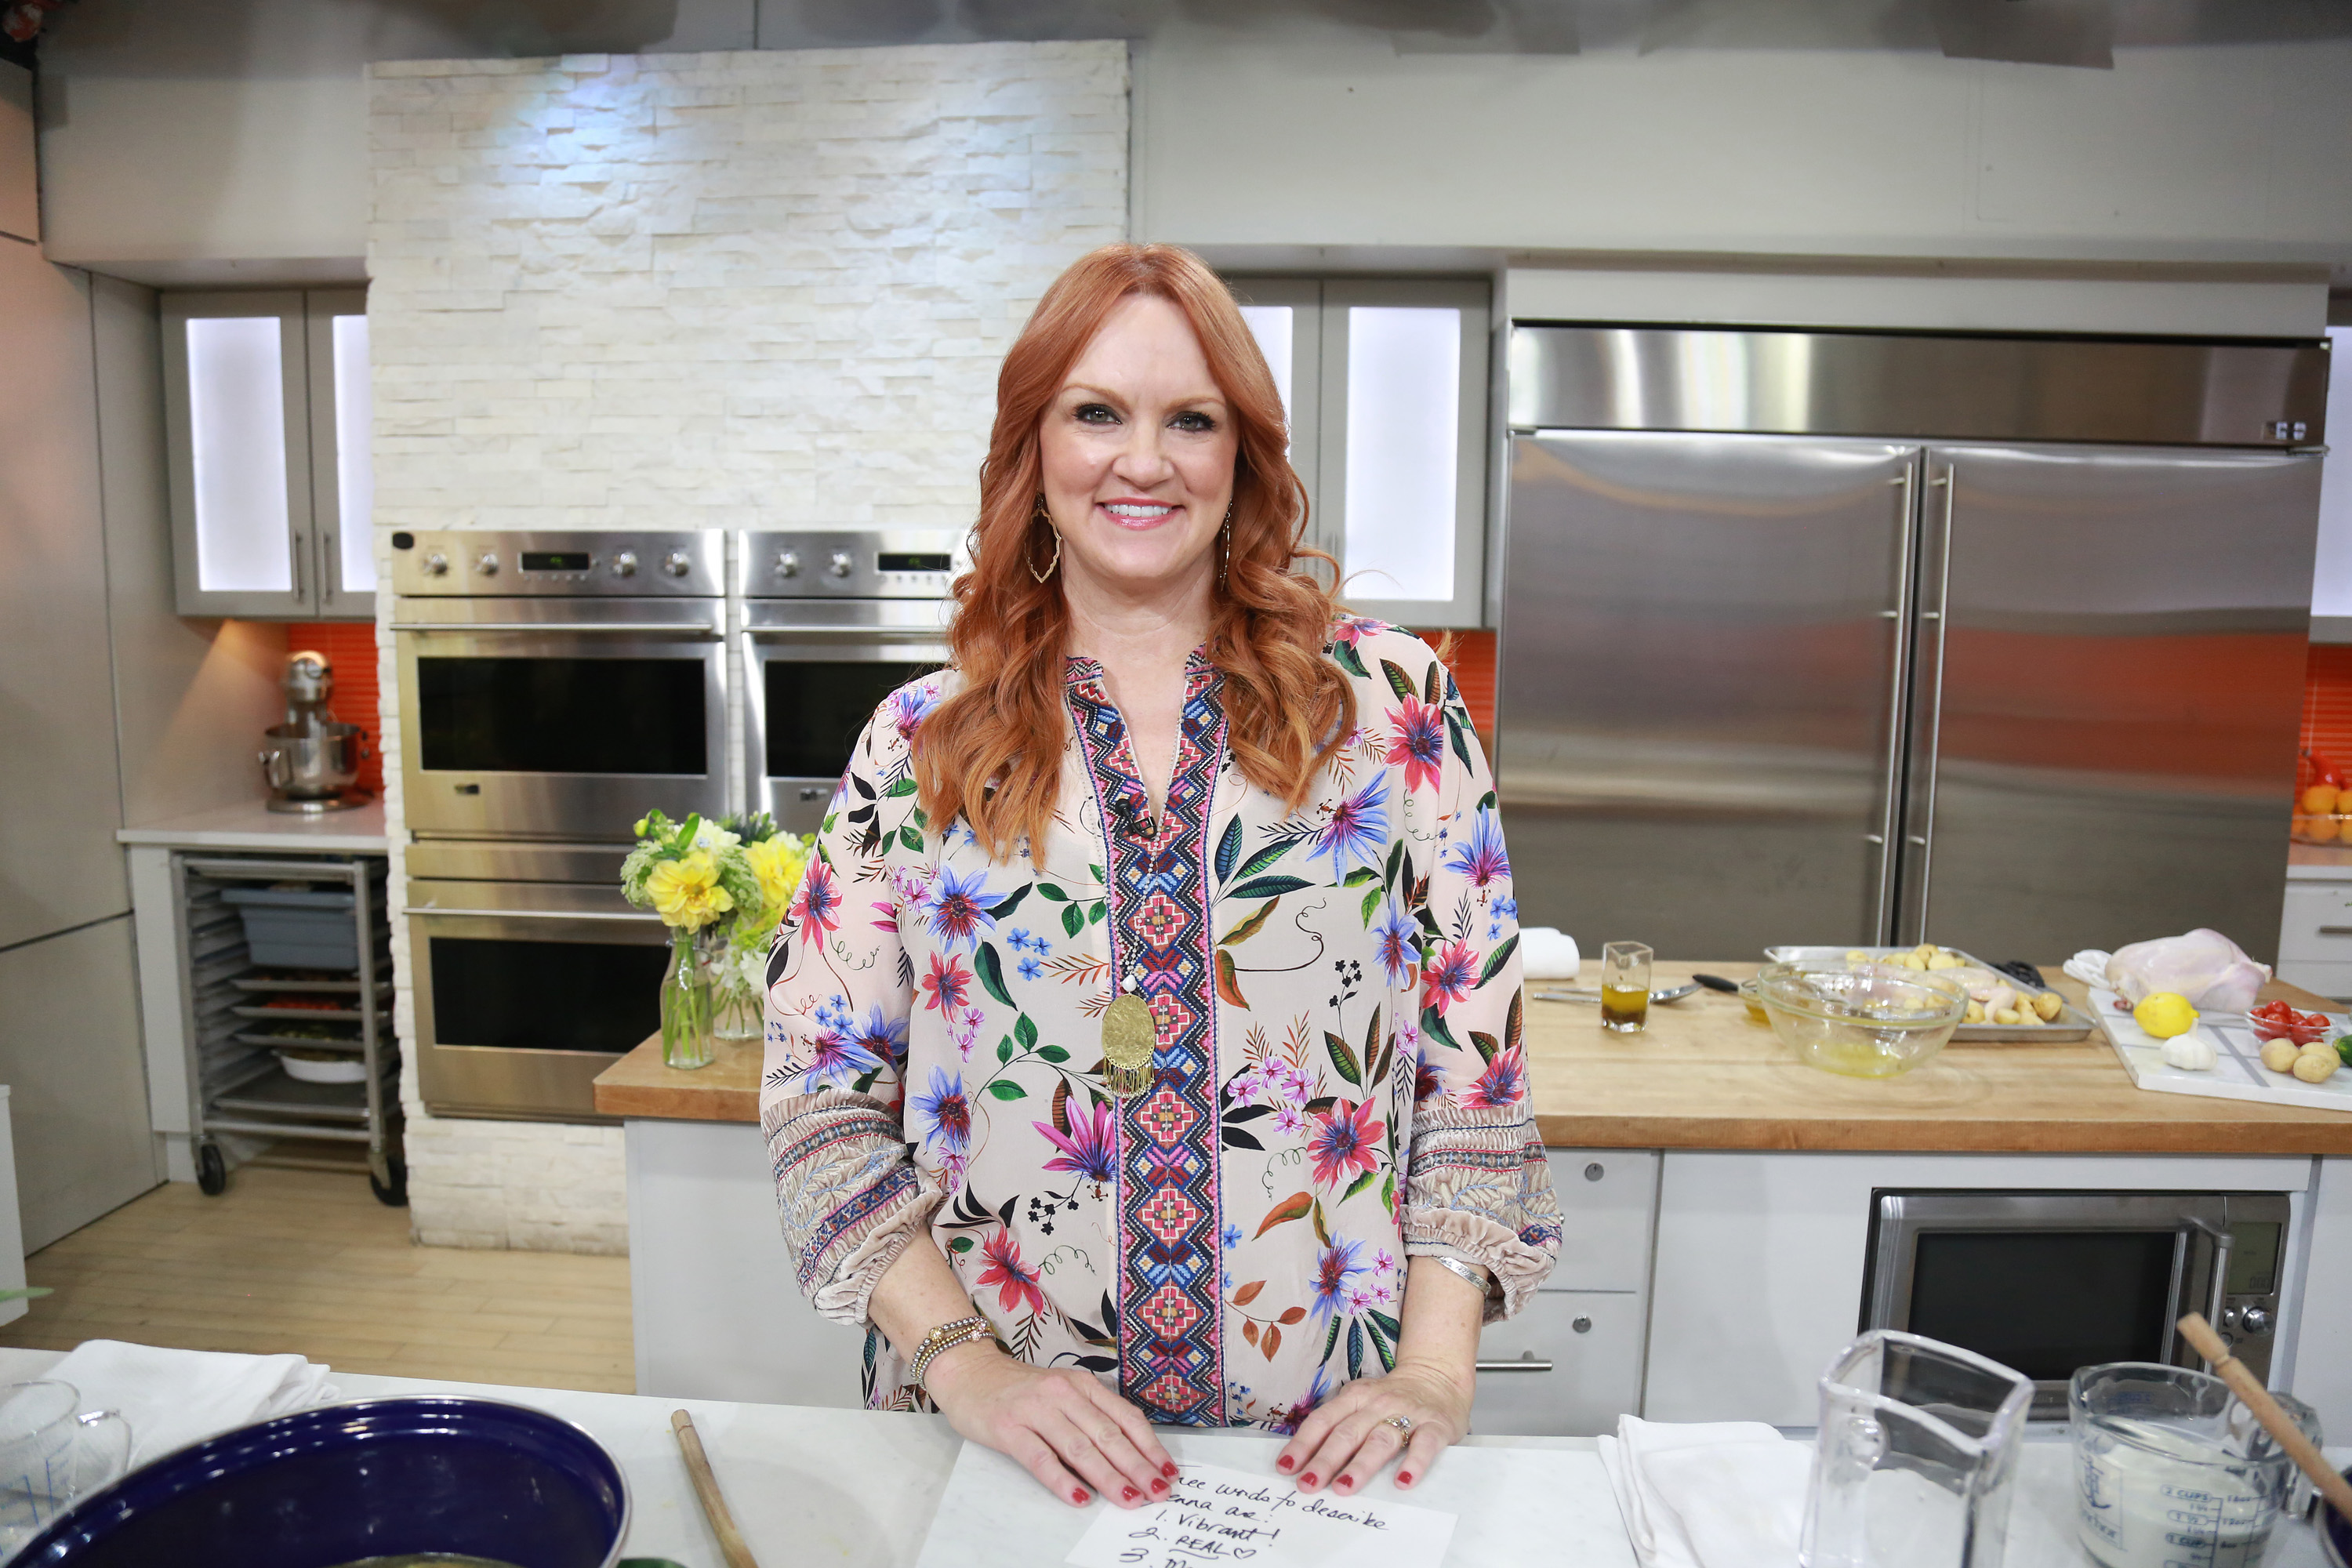 Ree Drummond smiling on the set of 'Today' wearing a brightly colored top